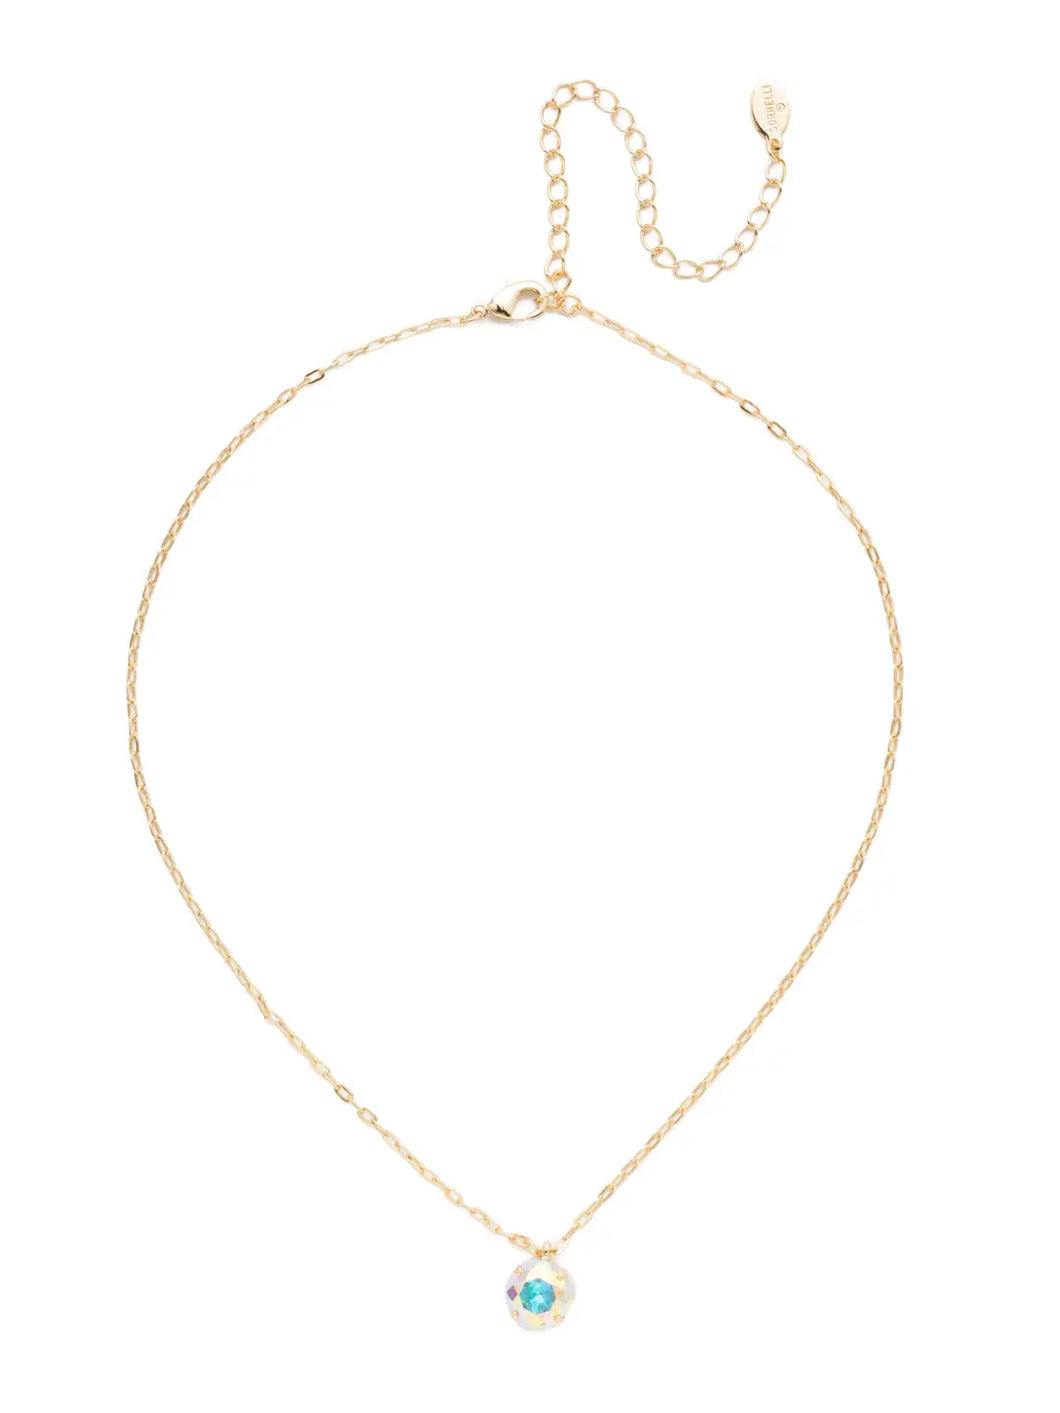 With a cushion-cut crystal and delicate chain, the Siren Pendant will add a little sparkle to your everyday look.